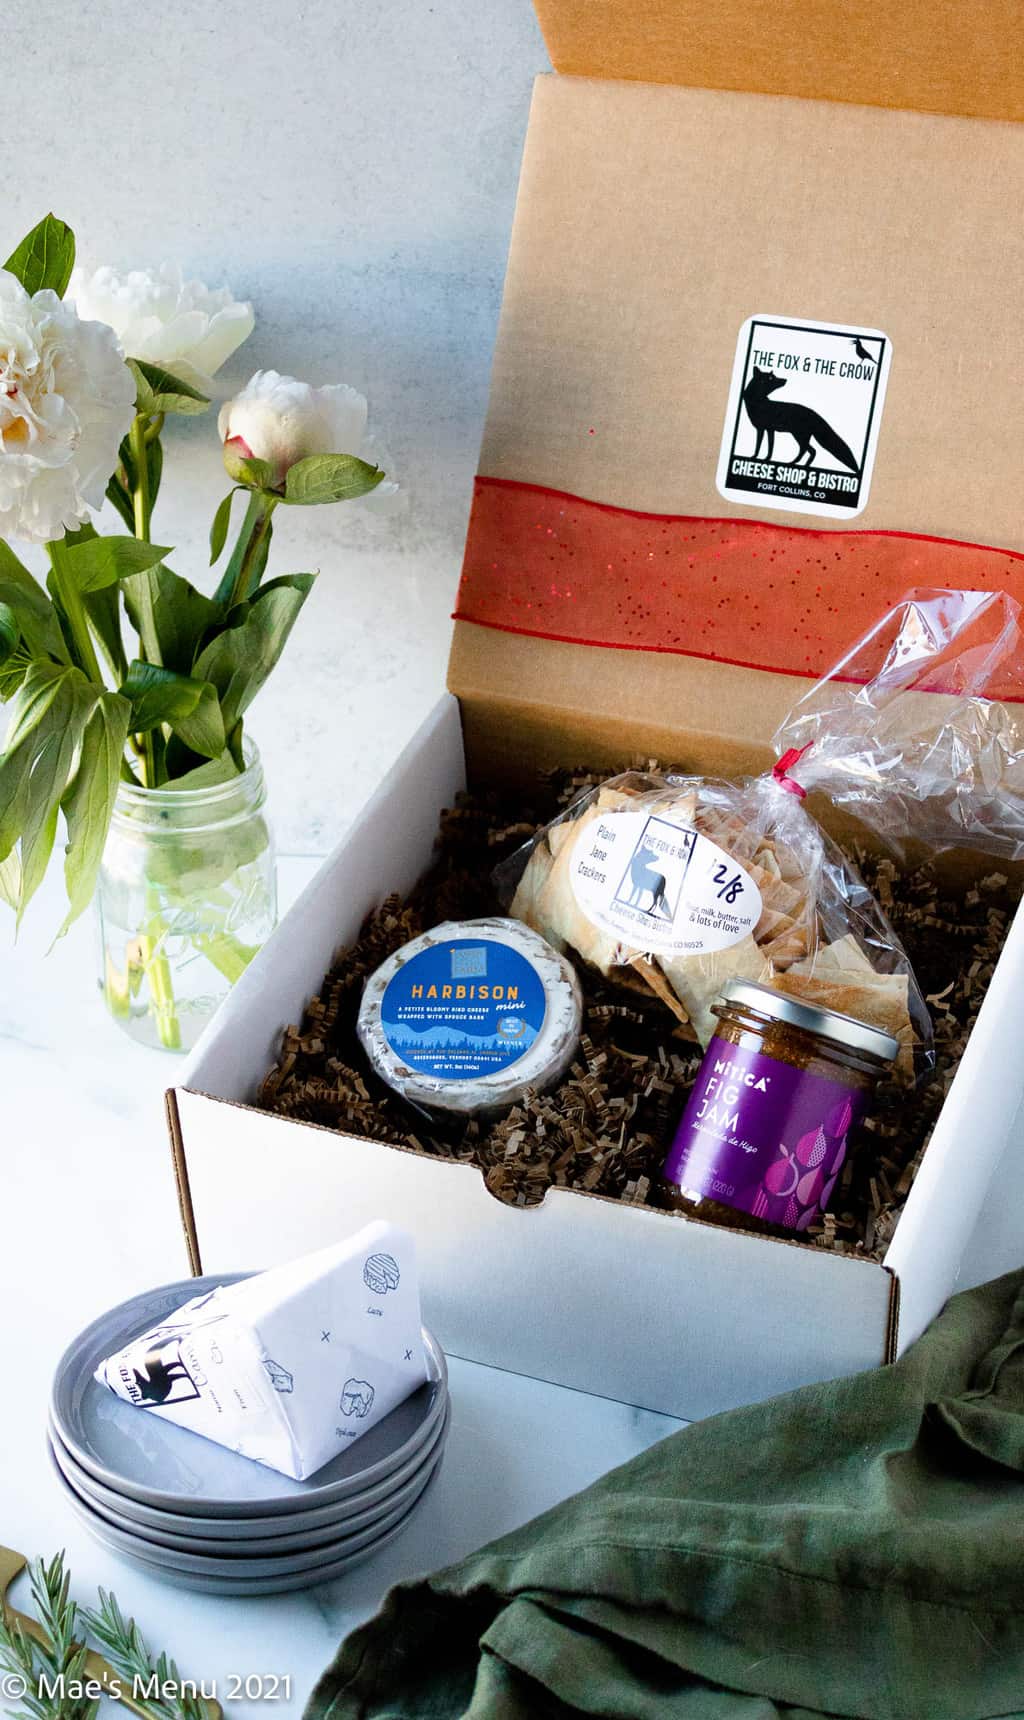 A white packing box of cheese, crackers, and fix jam next to a small vase of flowers.